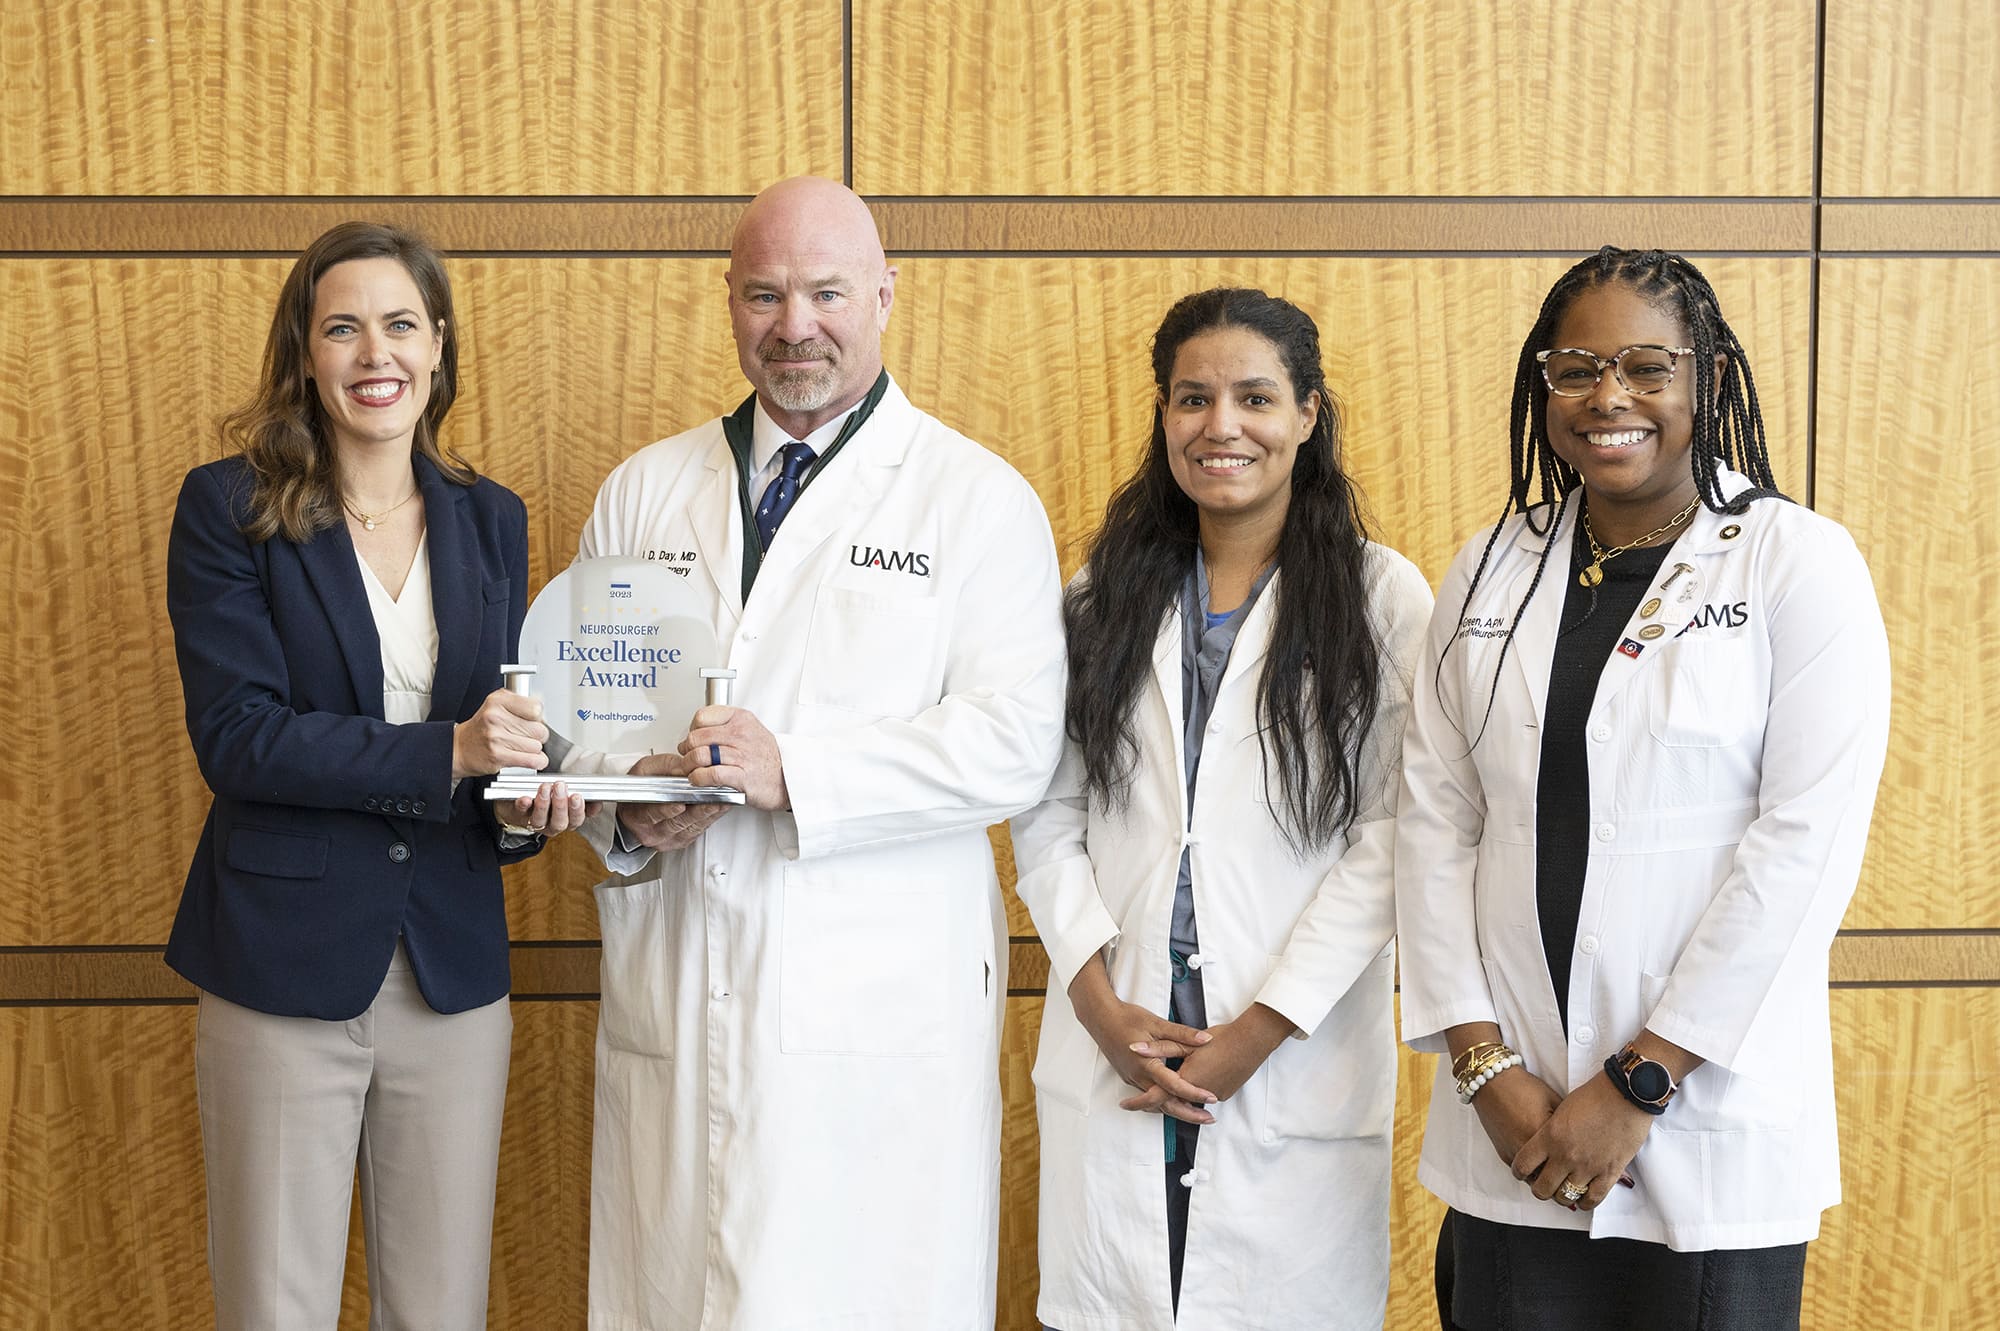 Healthgrades ranks the University of Arkansas for Medical Sciences (UAMS) among the top 5% of hospitals nationwide for cranial neurosurgery in 2023.